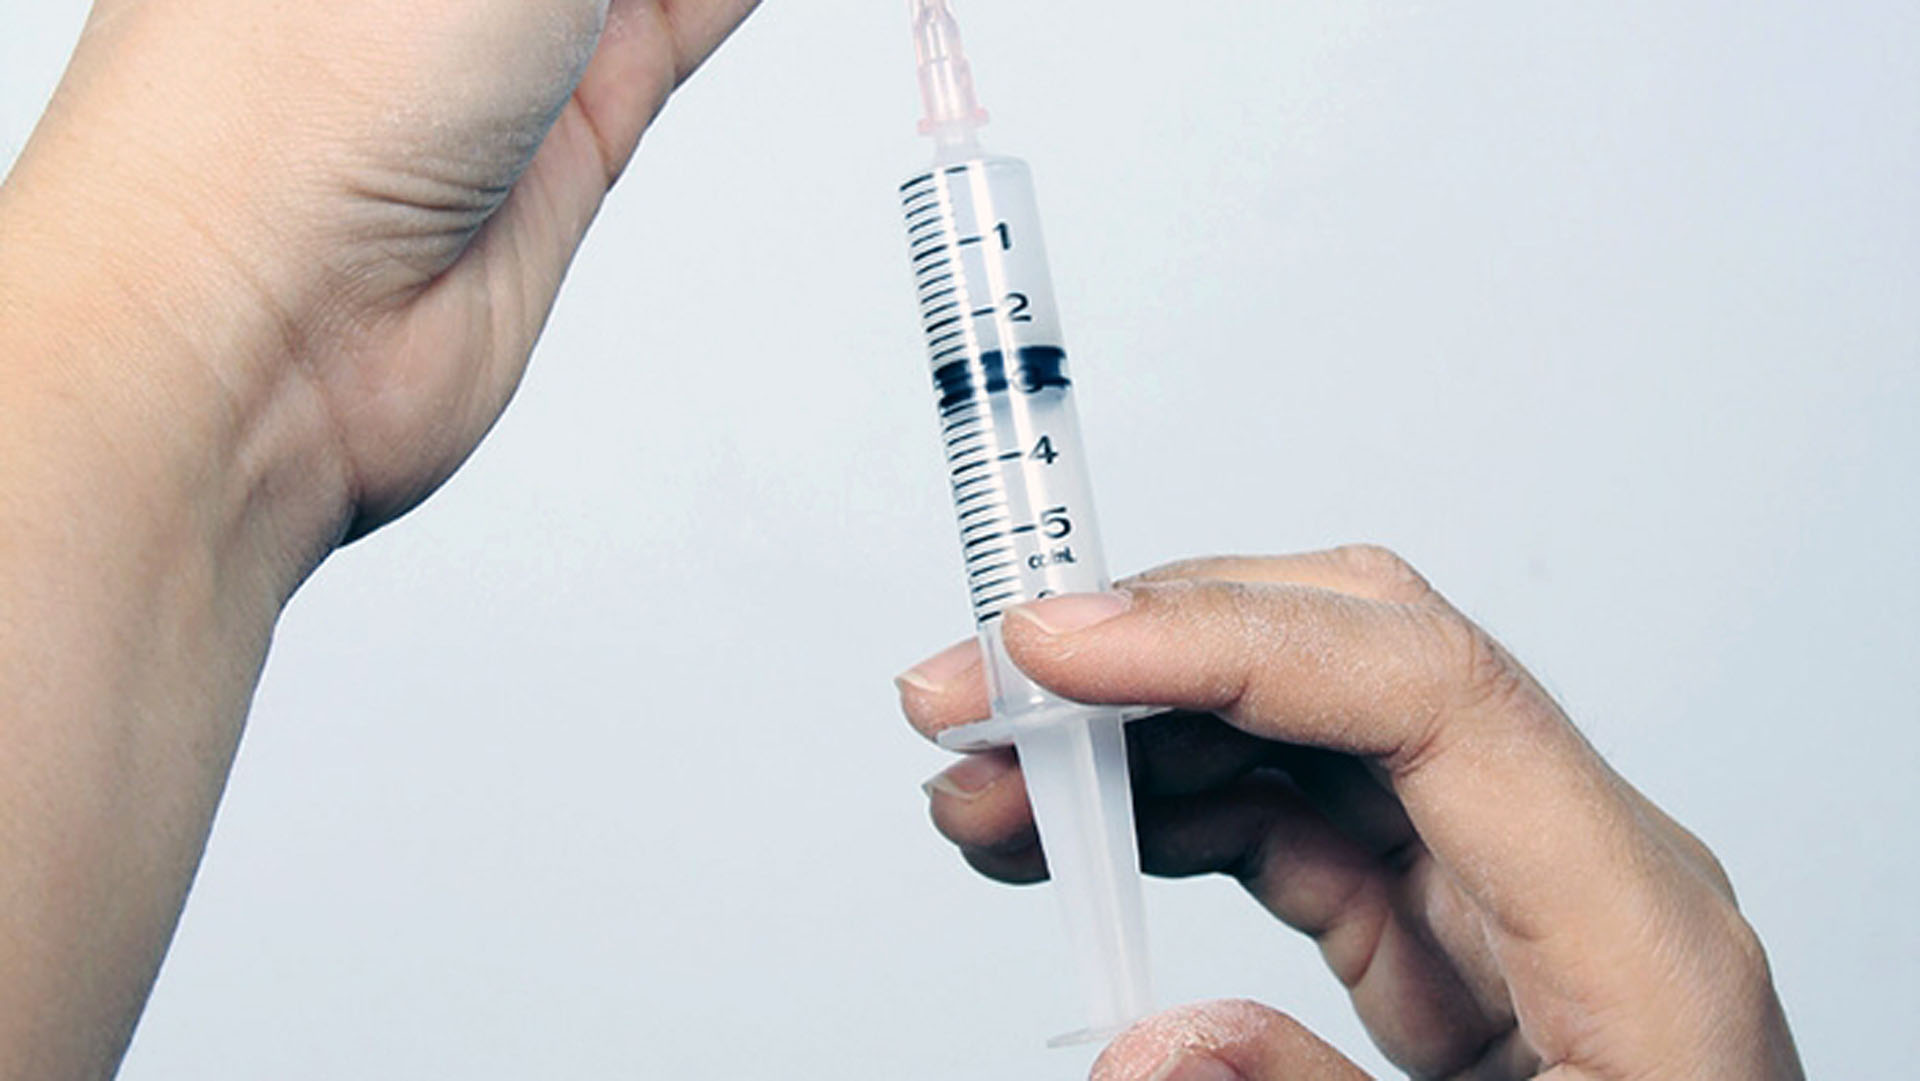 The history of the hypodermic needle